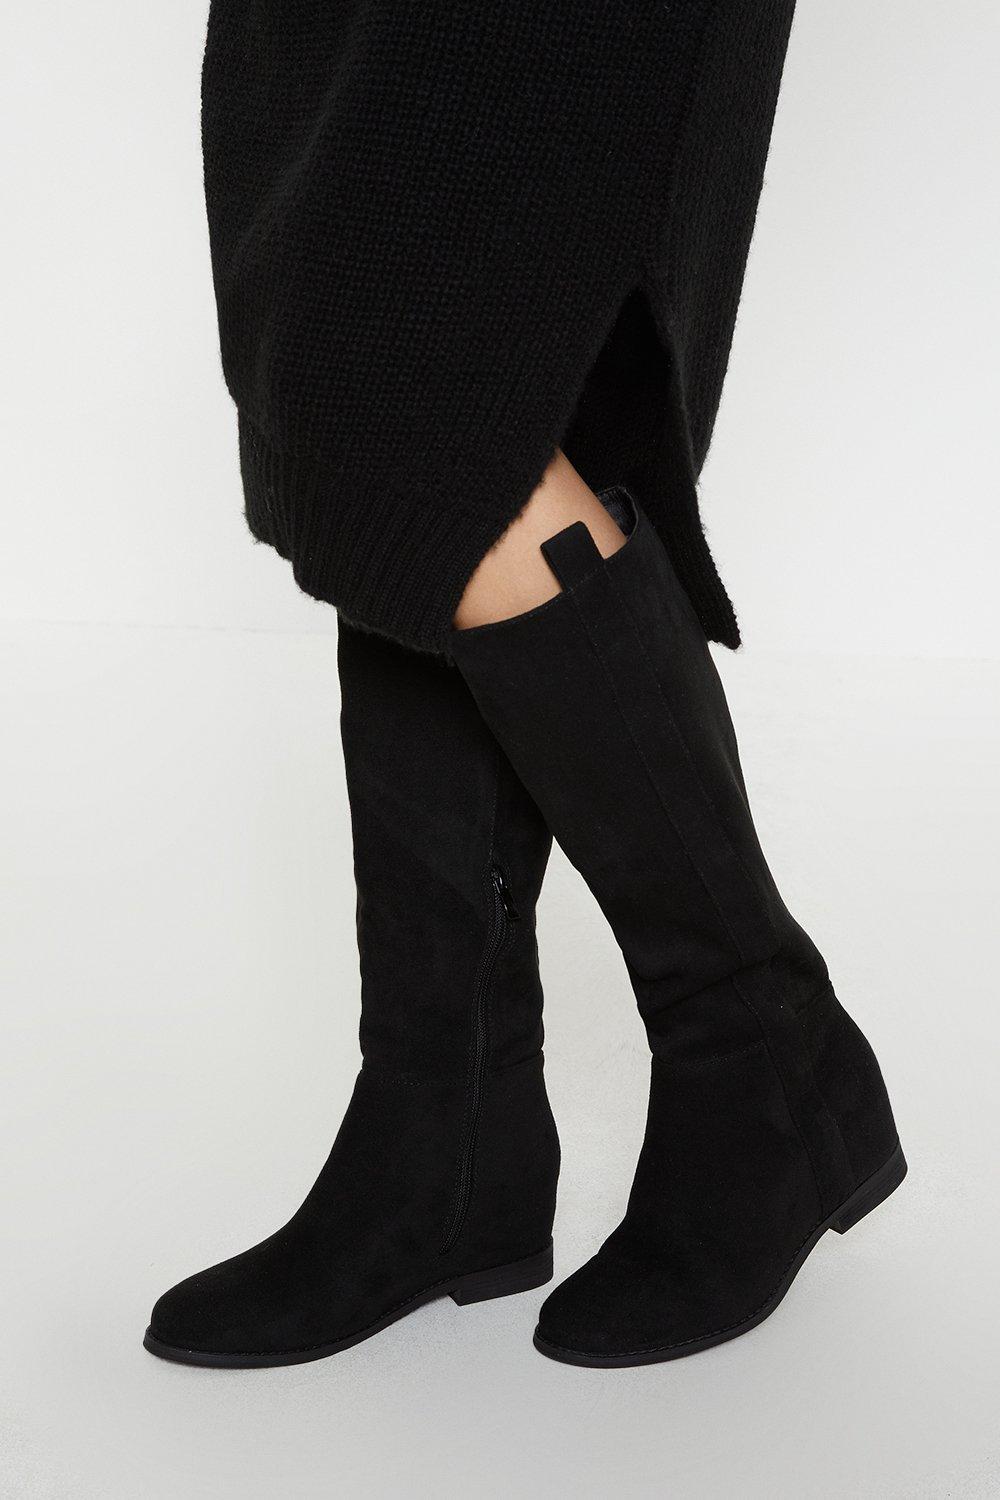 Womens Krista Concealed Wedge Knee High Boots